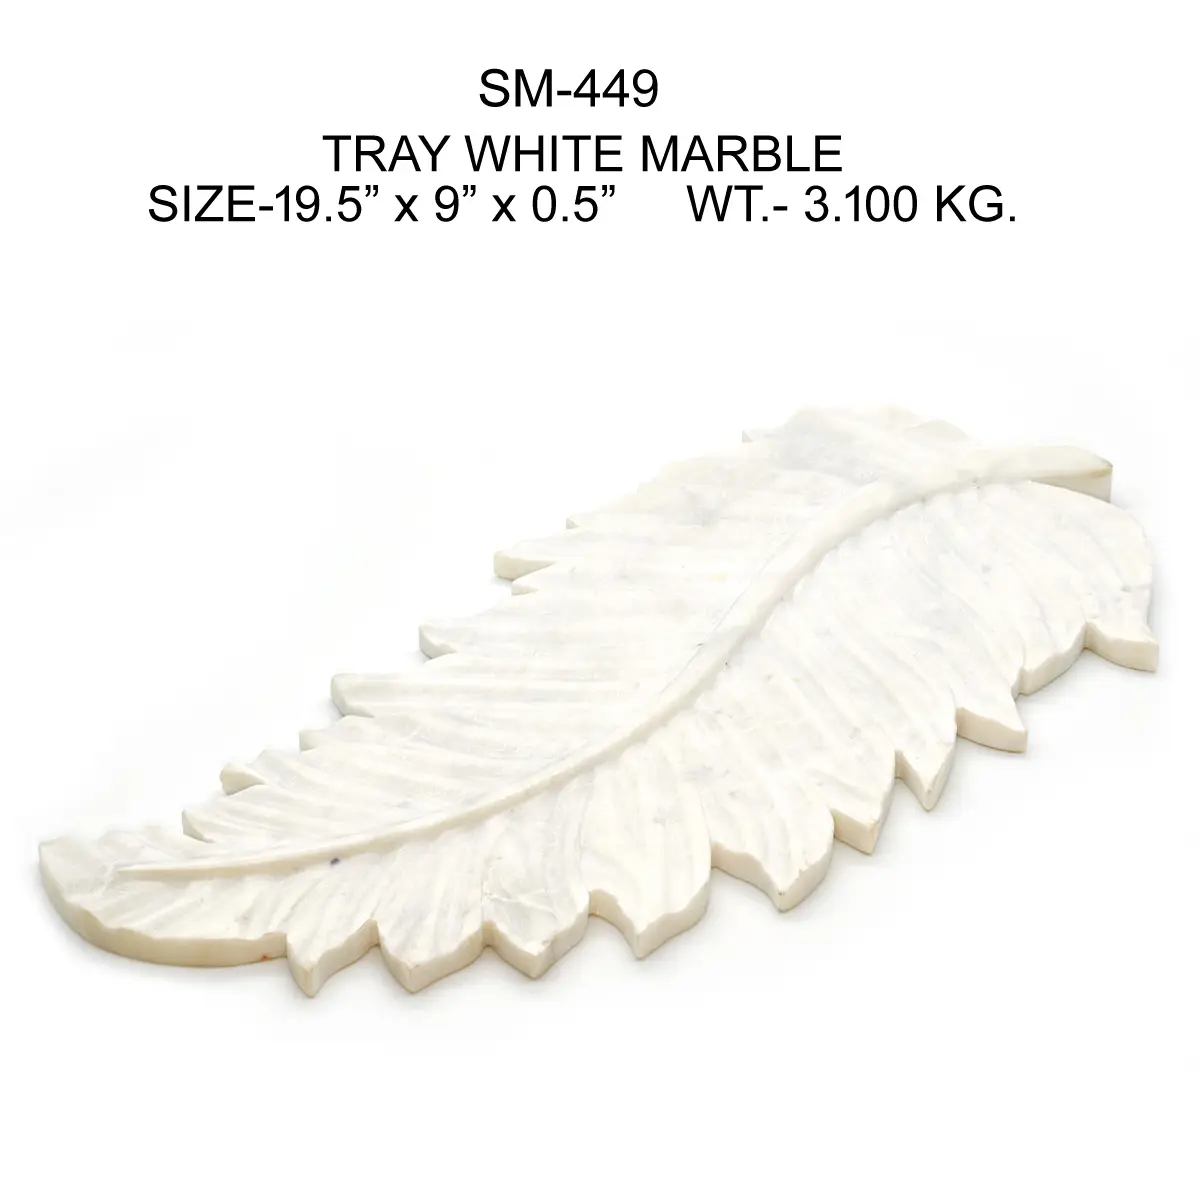 LEAF TRAY WHITE MARBLE